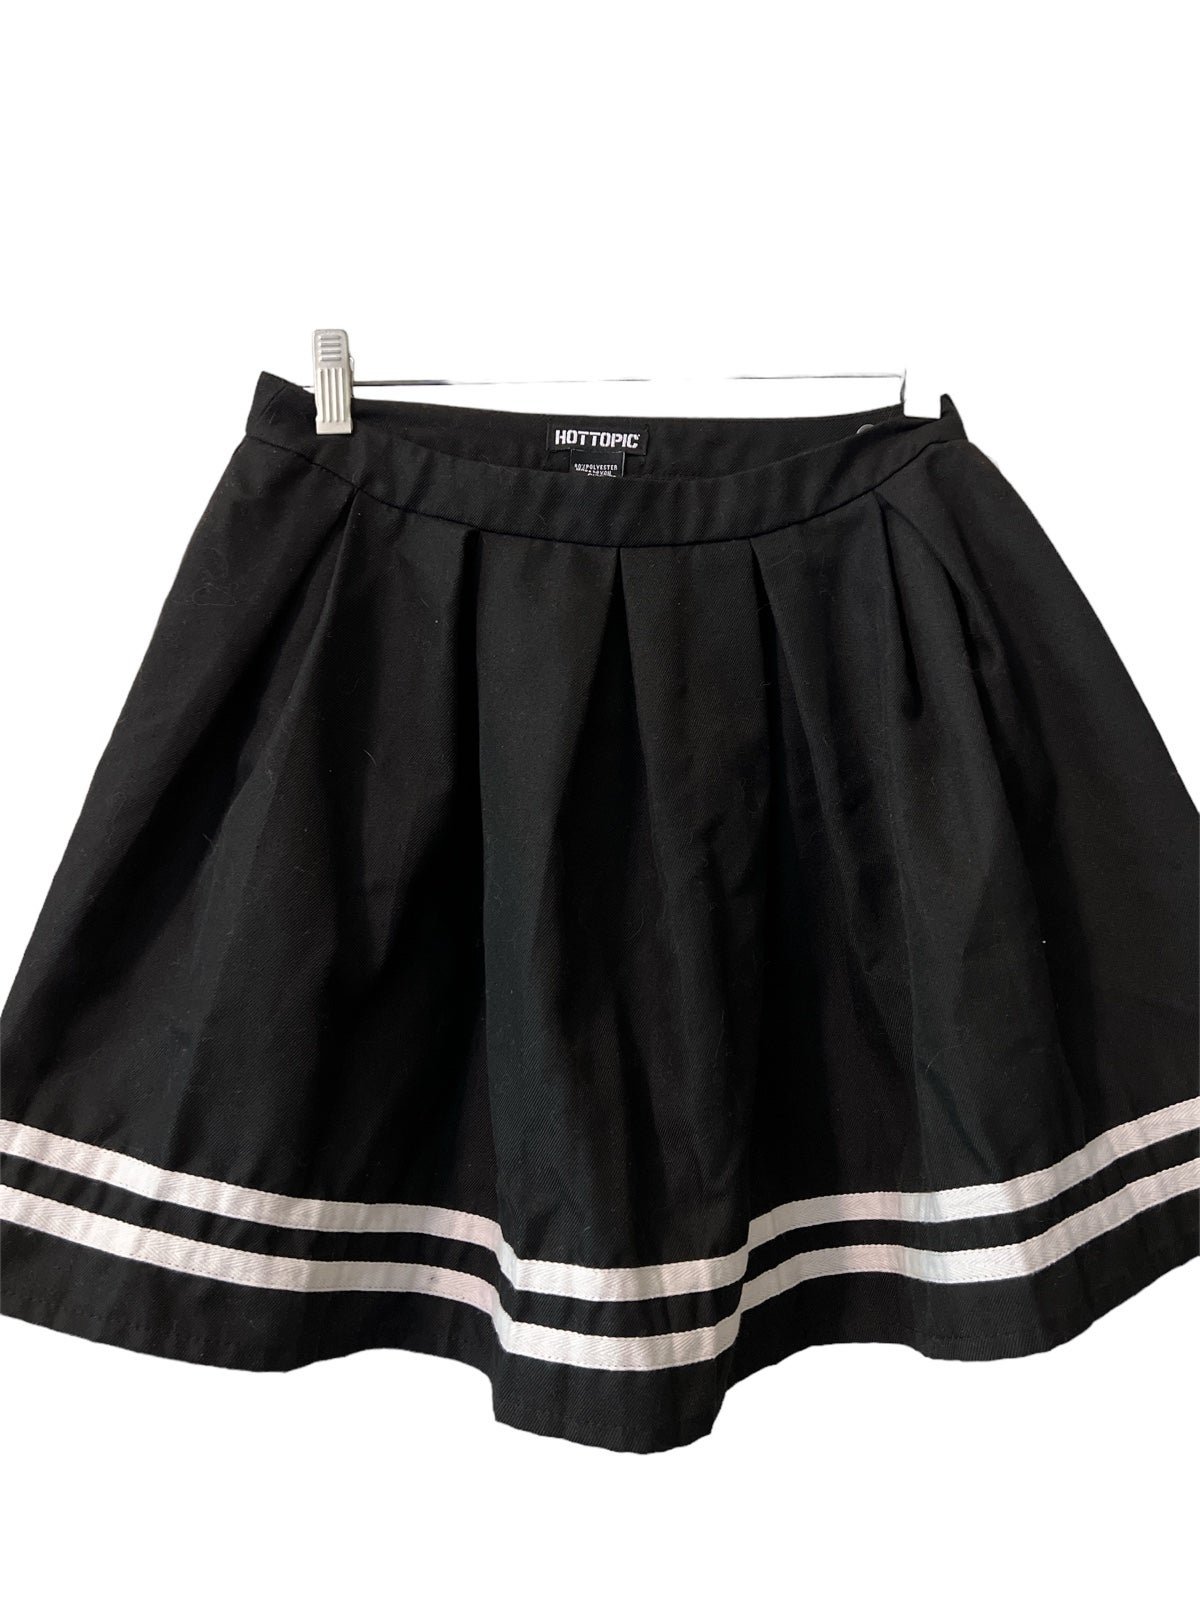 Wholesale price Hot Topic pleated black skirt size smal